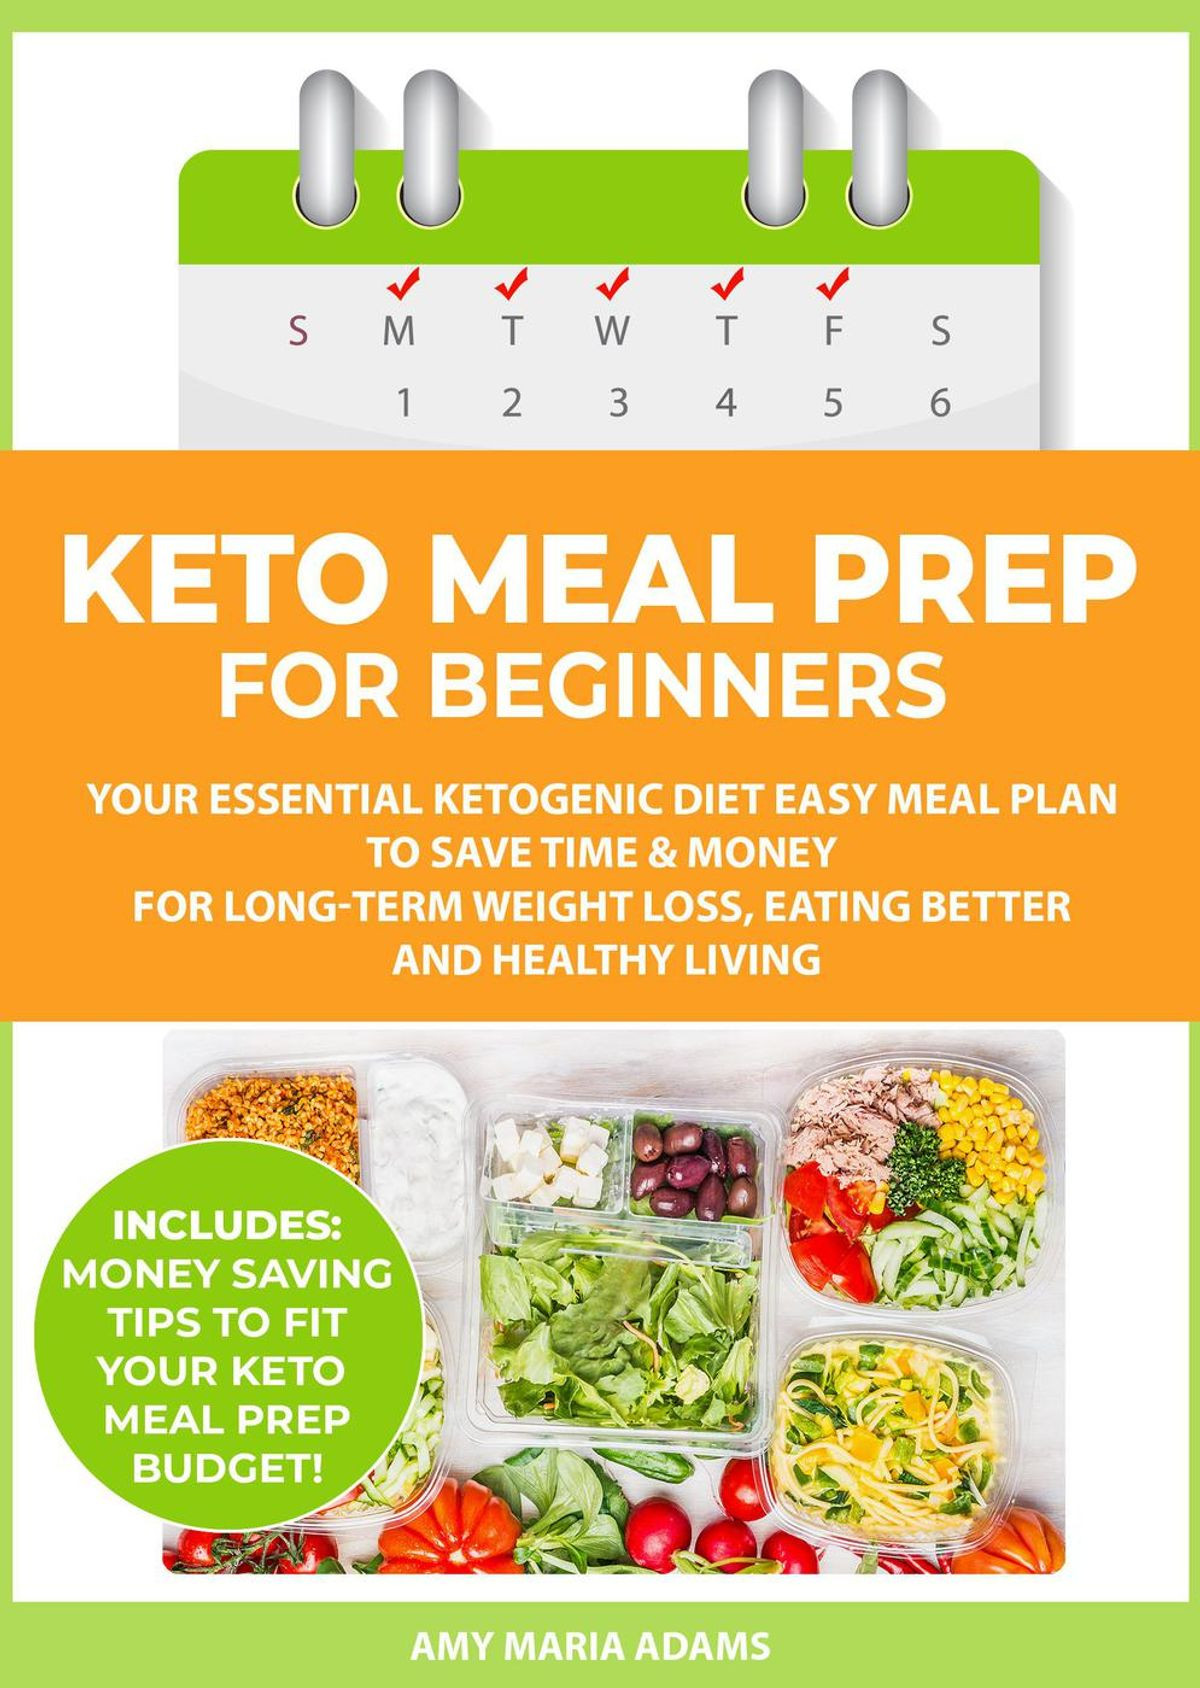 Healthy Keto Meal Plan
 Keto Meal Prep for Beginners Your Essential Ketogenic